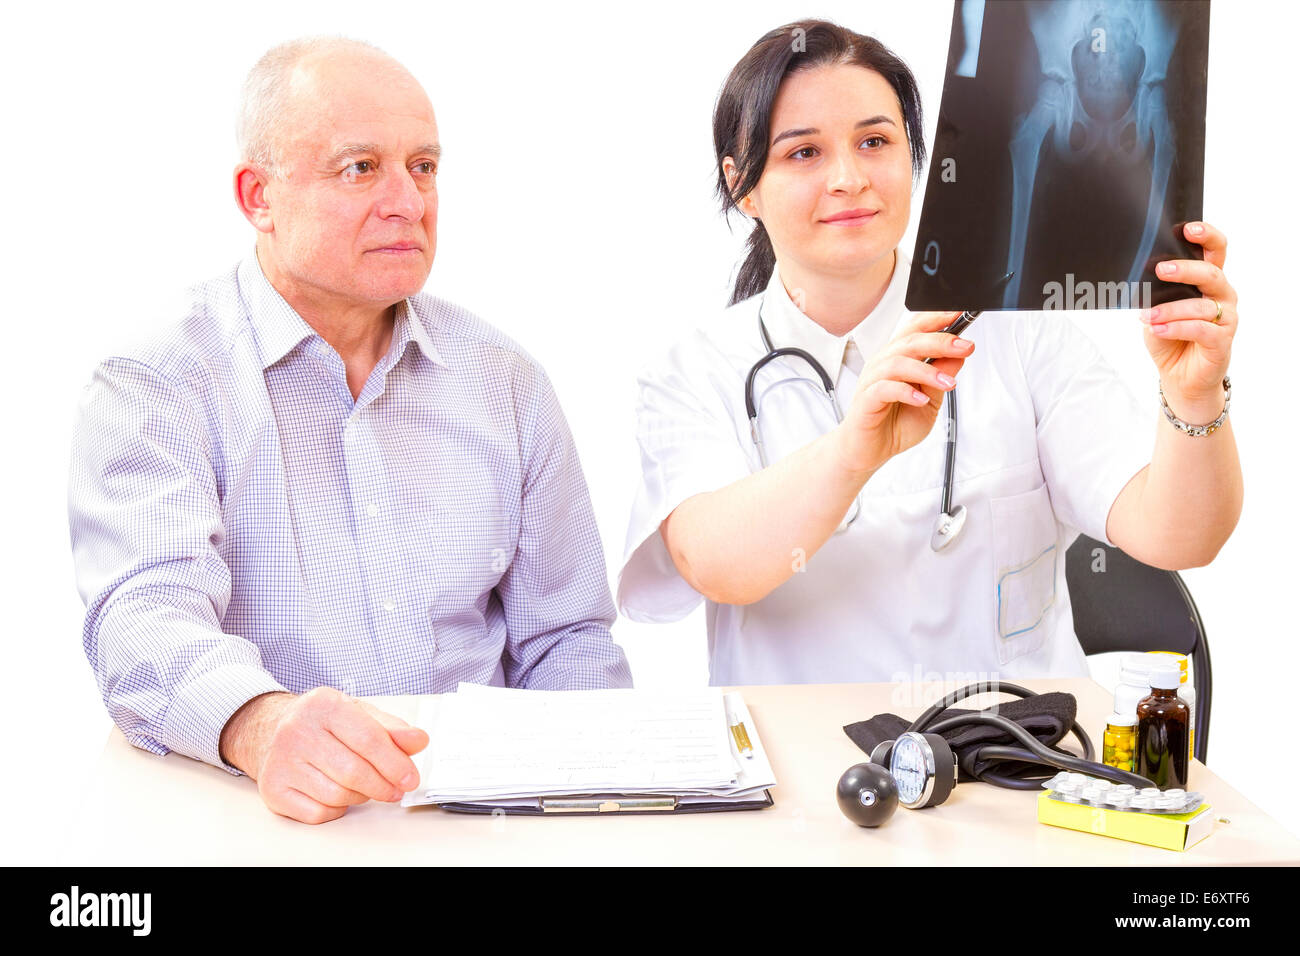 Women doctor showing a x-ray image to senior man patient. Stock Photo